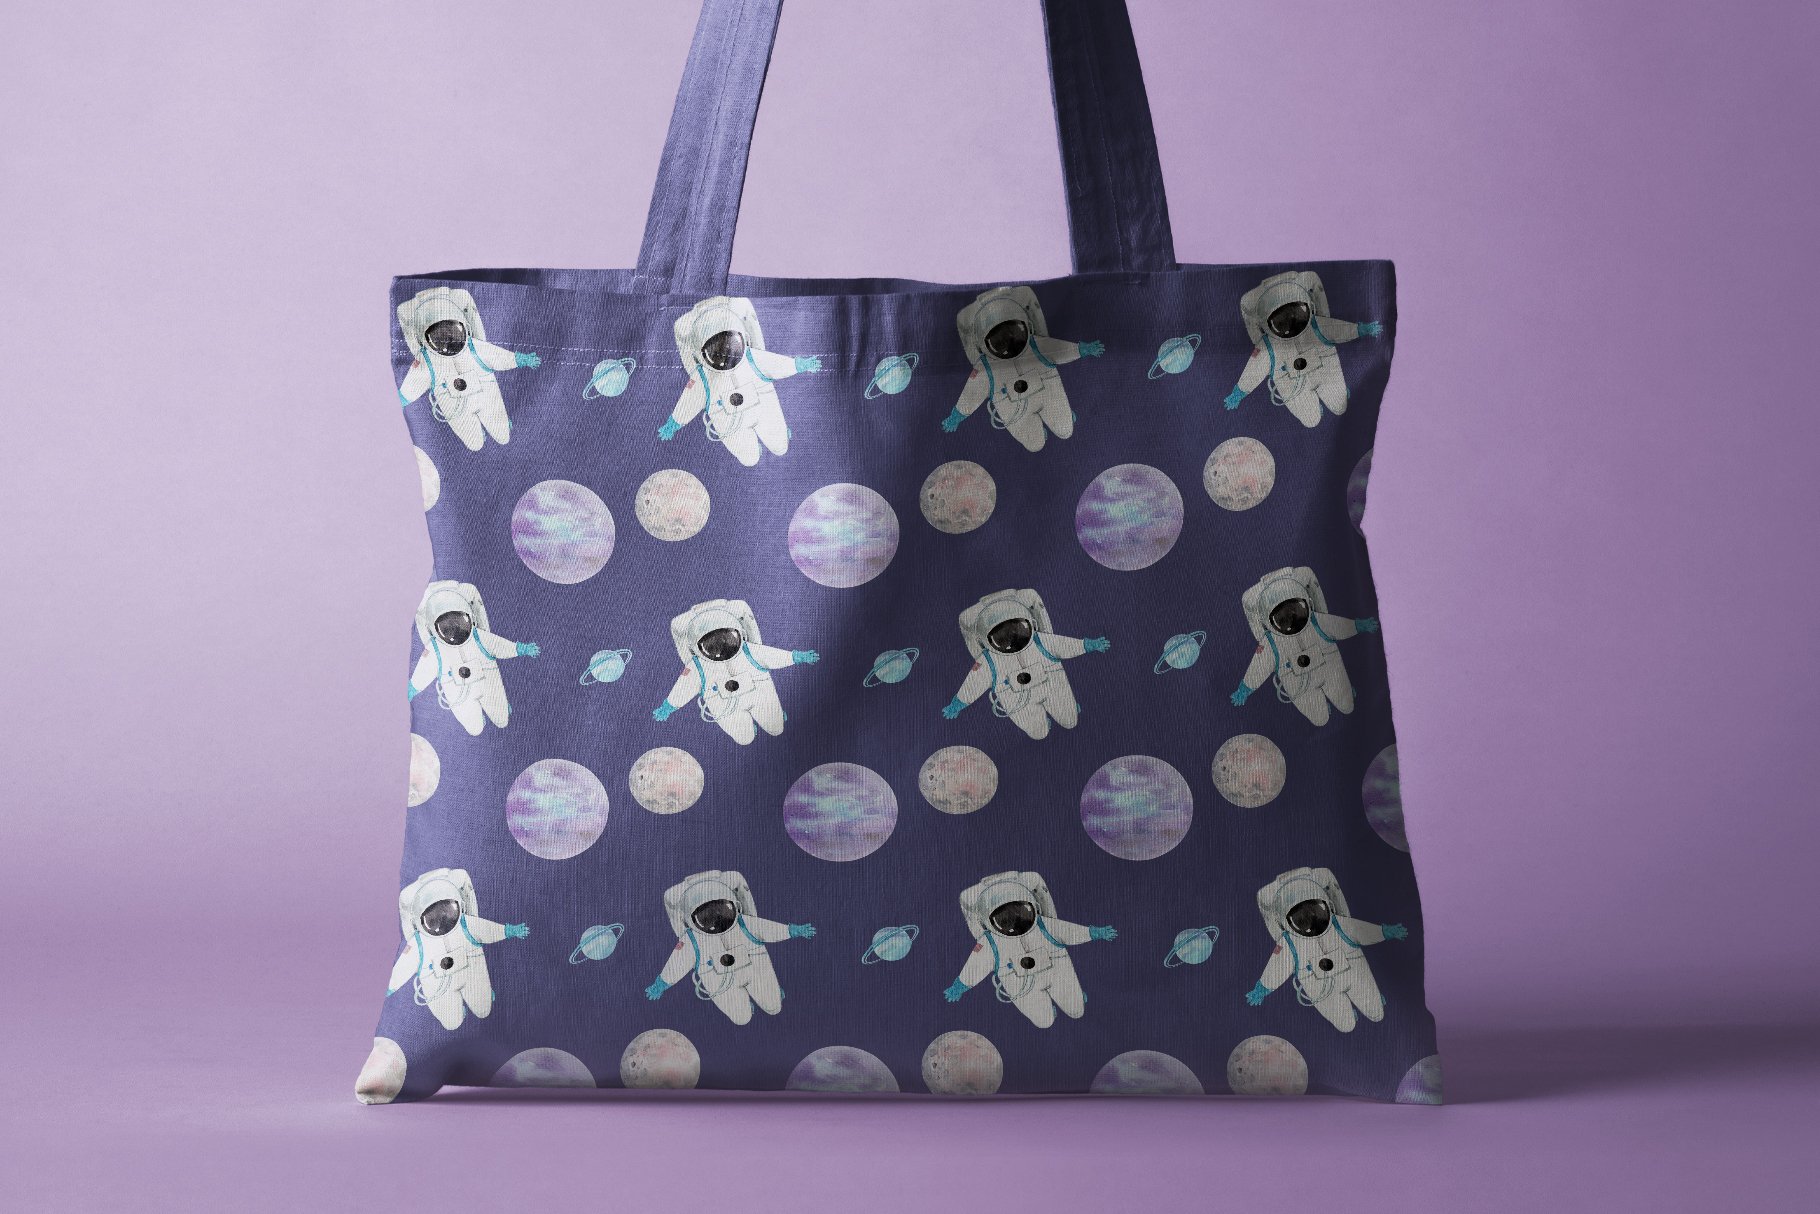 Purple bag with planets.